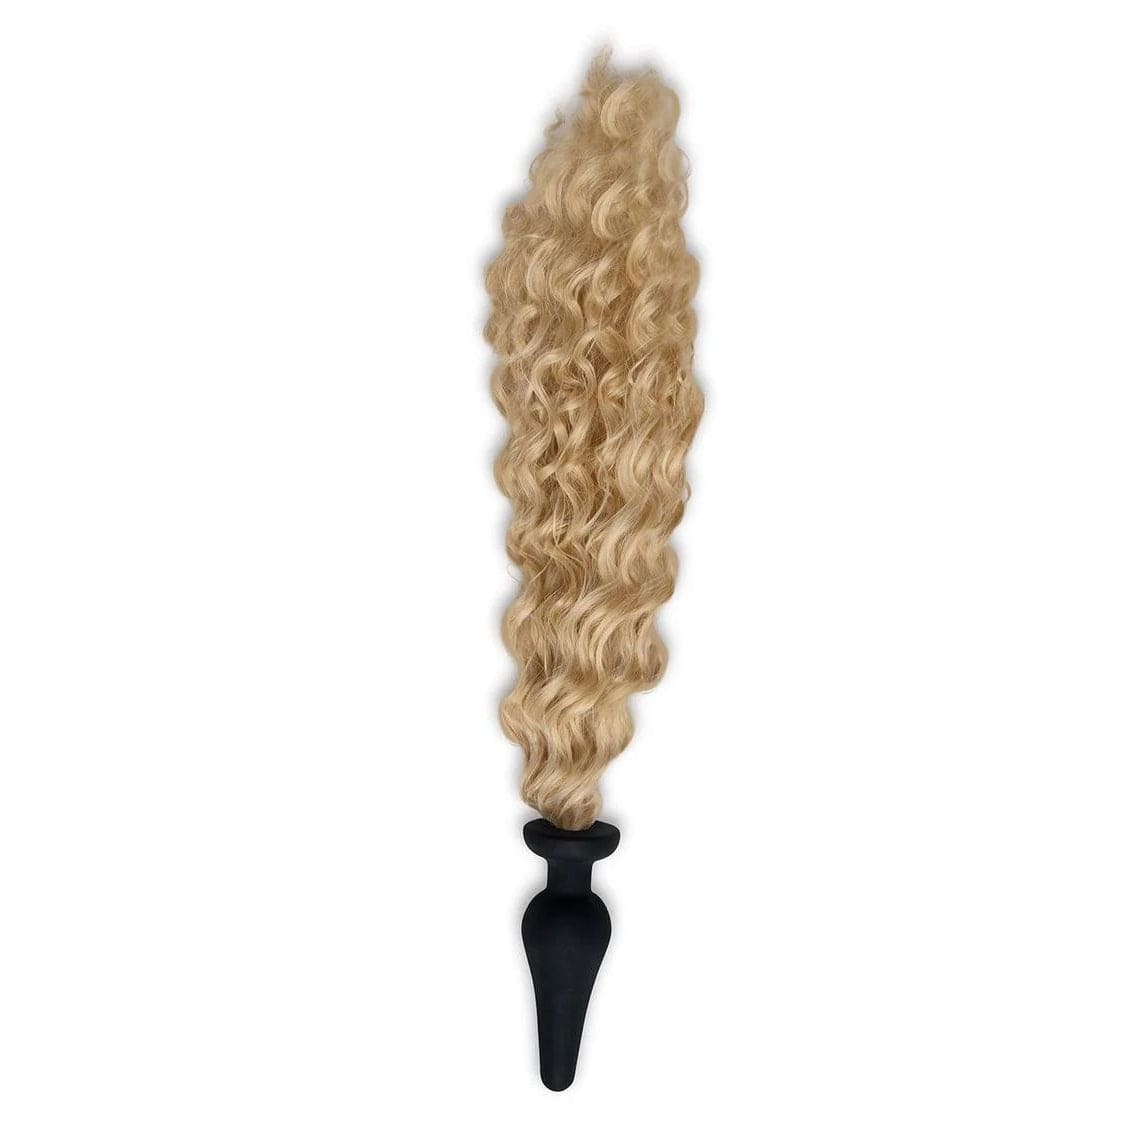 WhipSmart™ Furry Tales Silicone Plug With Blondie Pony Tail - Rolik®